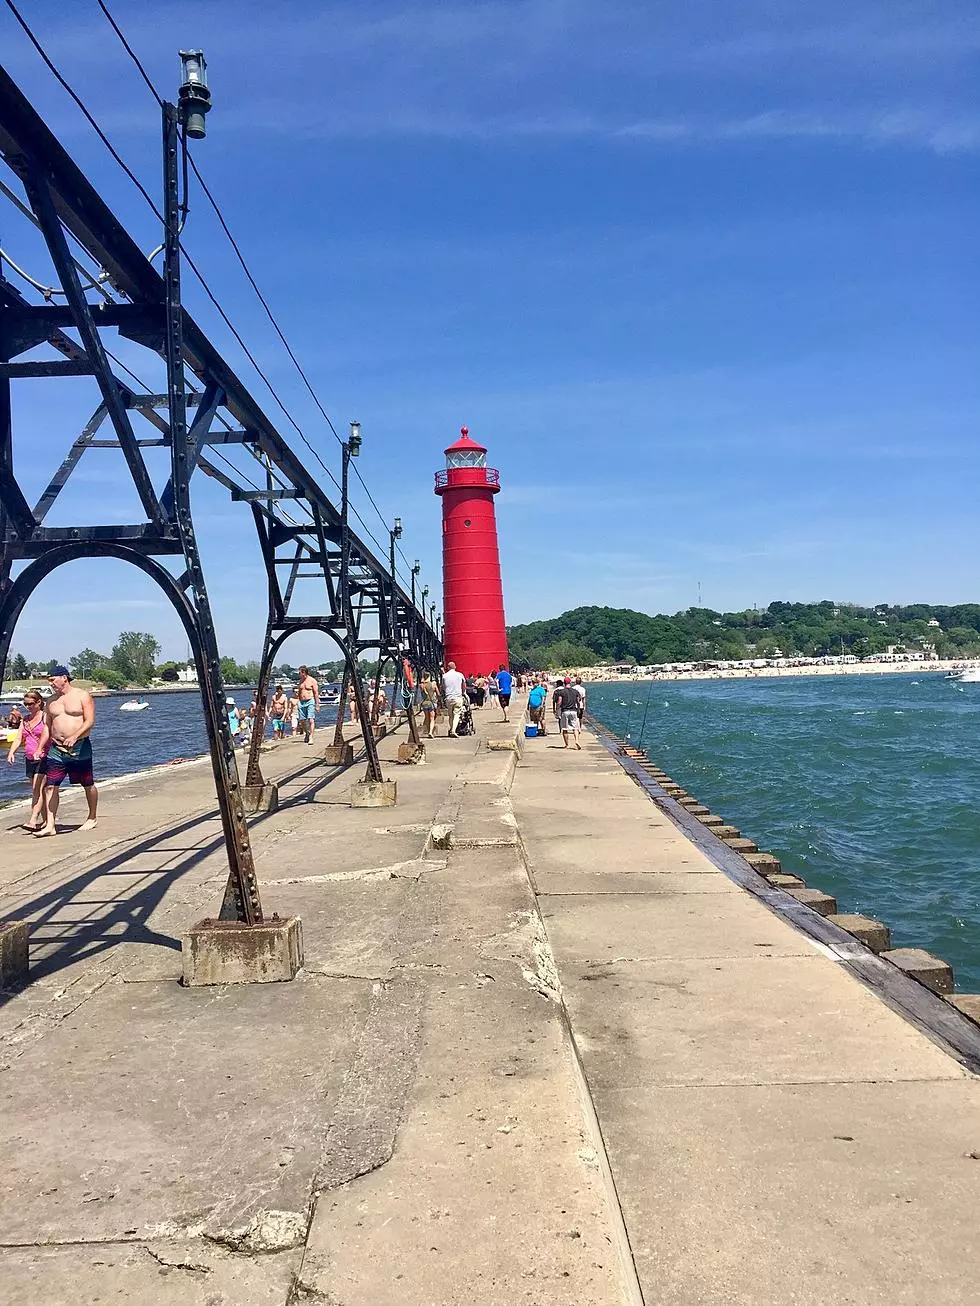 You Can Now Buy a Scale Model of the Grand Haven Pier